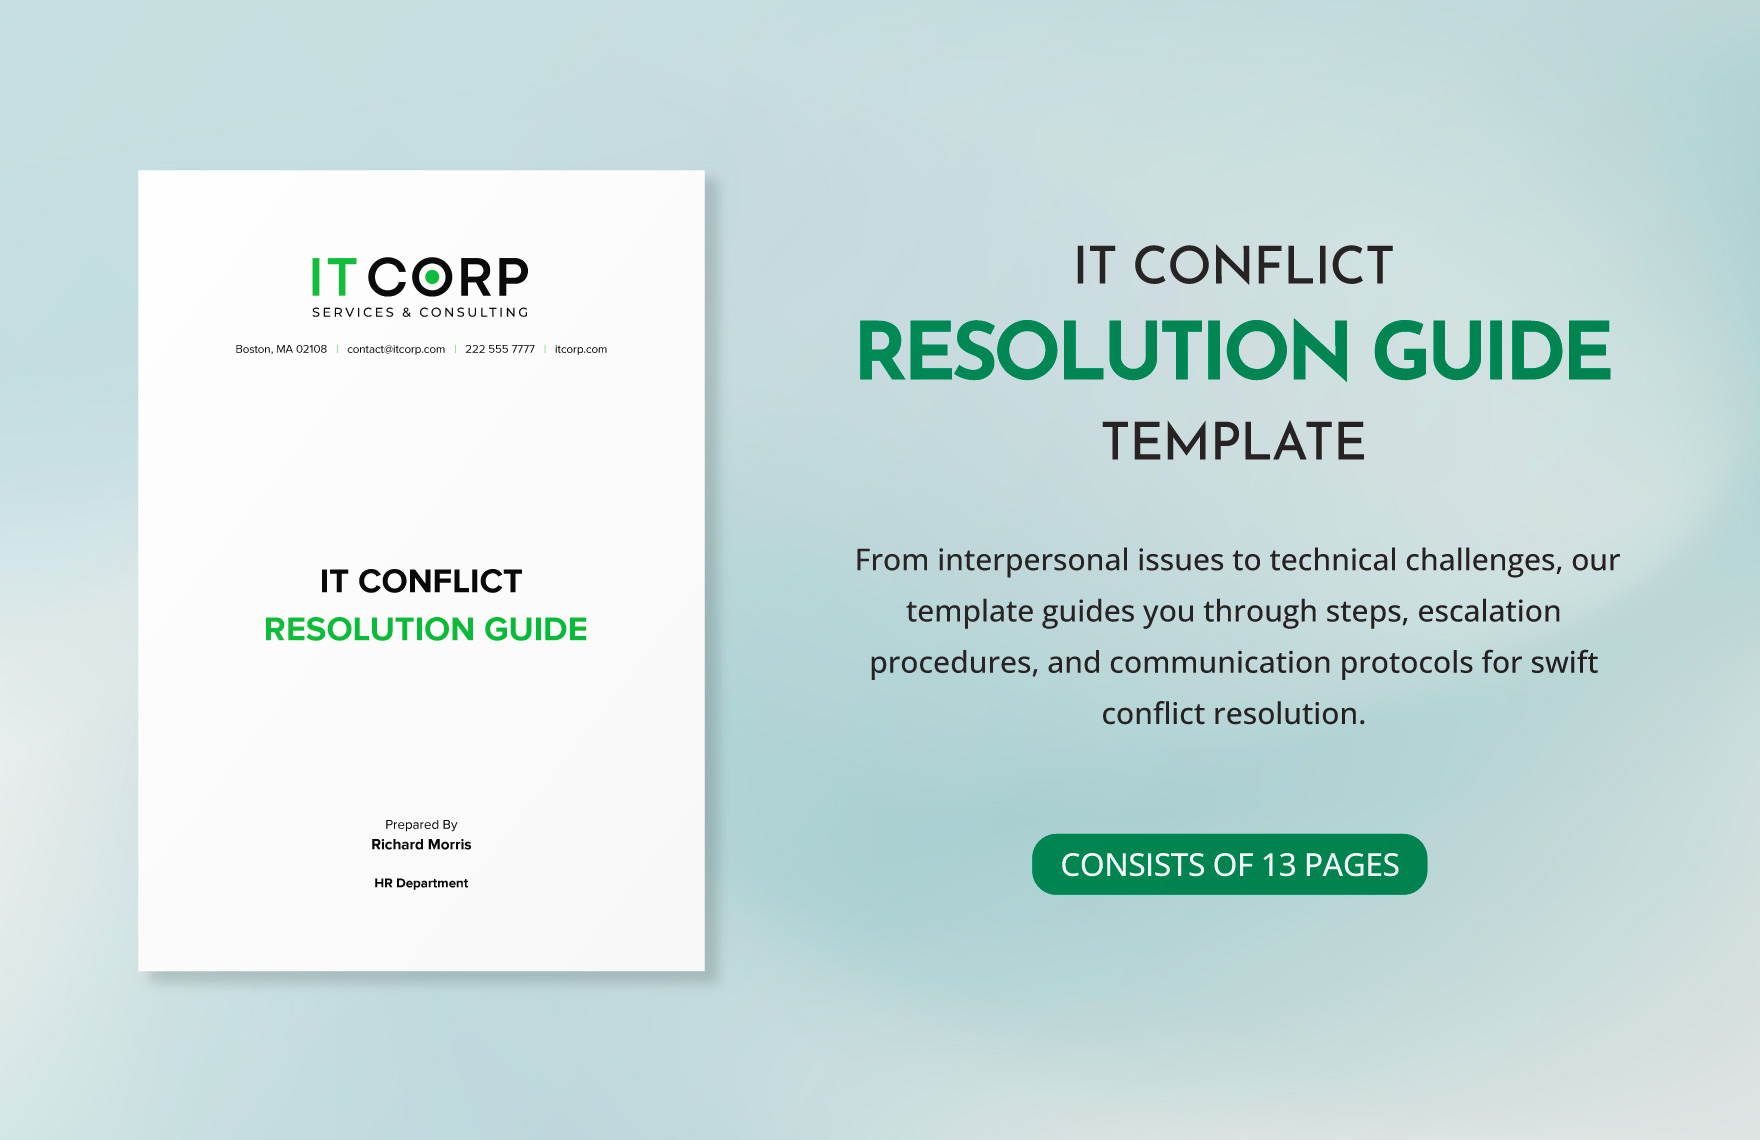 IT Conflict Resolution Guide Template